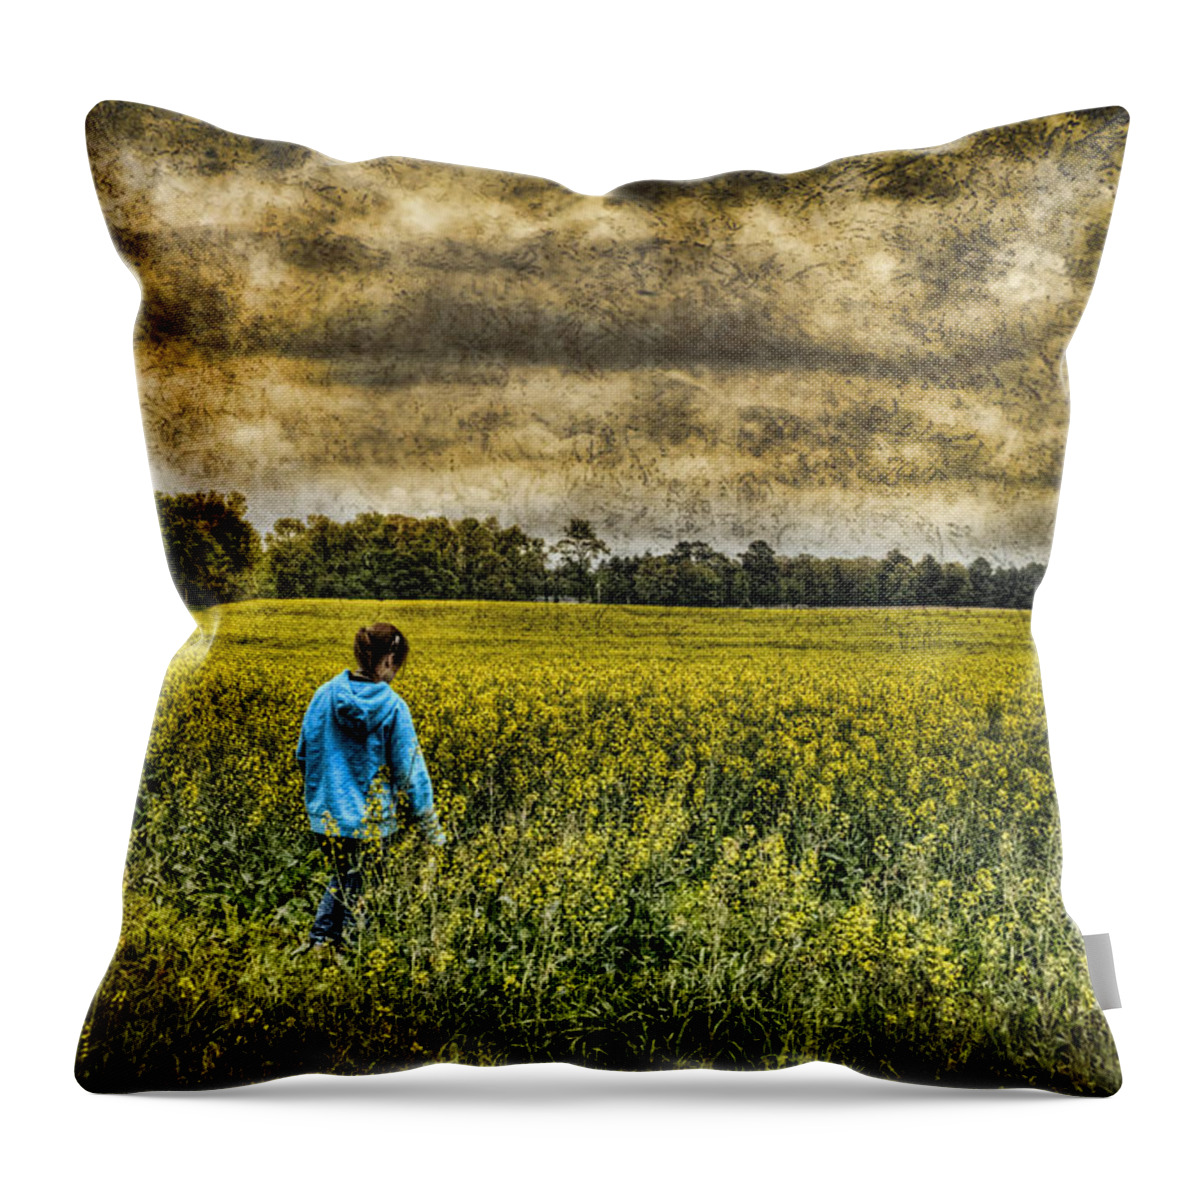 Deep Throw Pillow featuring the photograph Deep In Thought by Kathy Clark